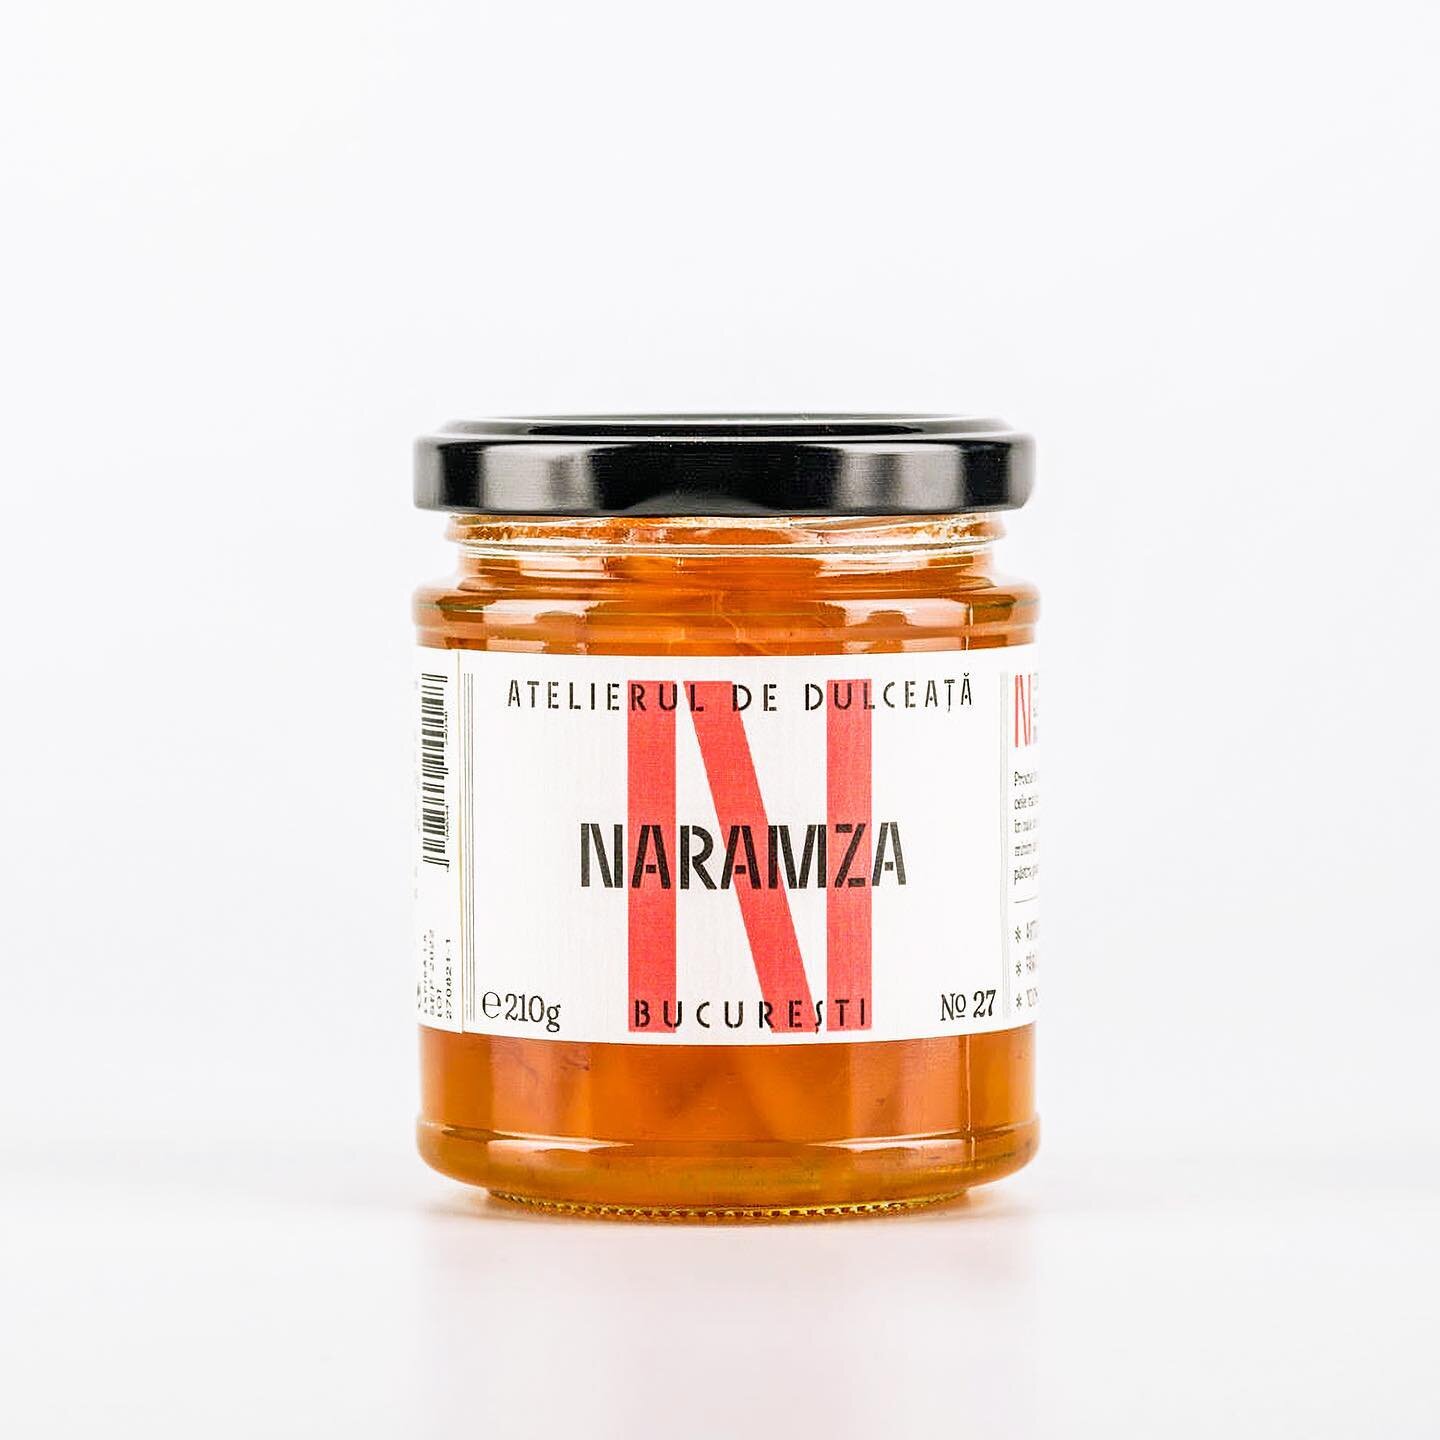 Sharing with you a spoonful of temptation, right before the Sunday feast. We very much enjoyed designing these Art Deco flavored jar labels for @naramza.ro, the Bucharest atelier of Nadir&eacute; Omer. She likes to handcraft fruit preserves in small 